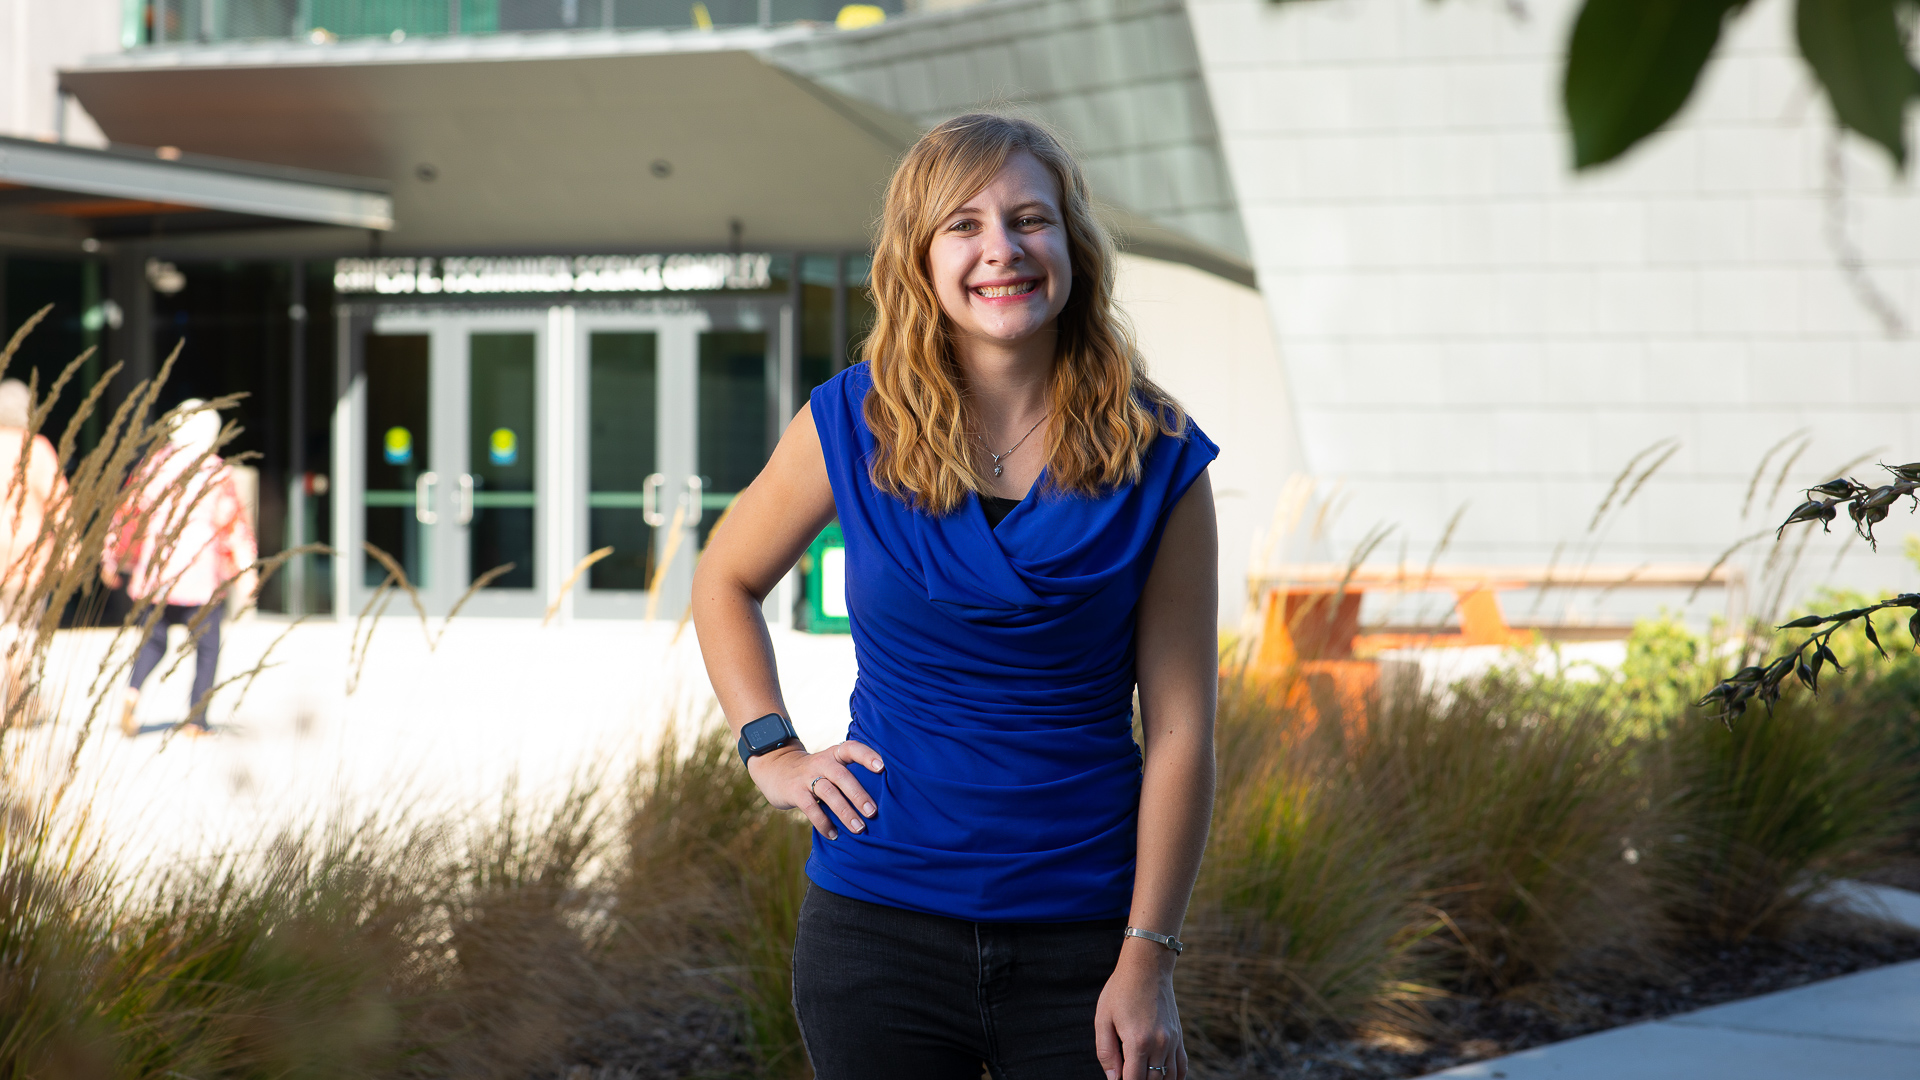 Sac State alumna Elizabeth Gabler, who worked on the Double Asteroid Redirection Test (DART) project at Sacramento-based aerospace and defense firm Aerojet Rocketdyne, stands in front of the Ernest E. Tschannen Science Complex with a big smile while wearing a blue shirt and black pants.